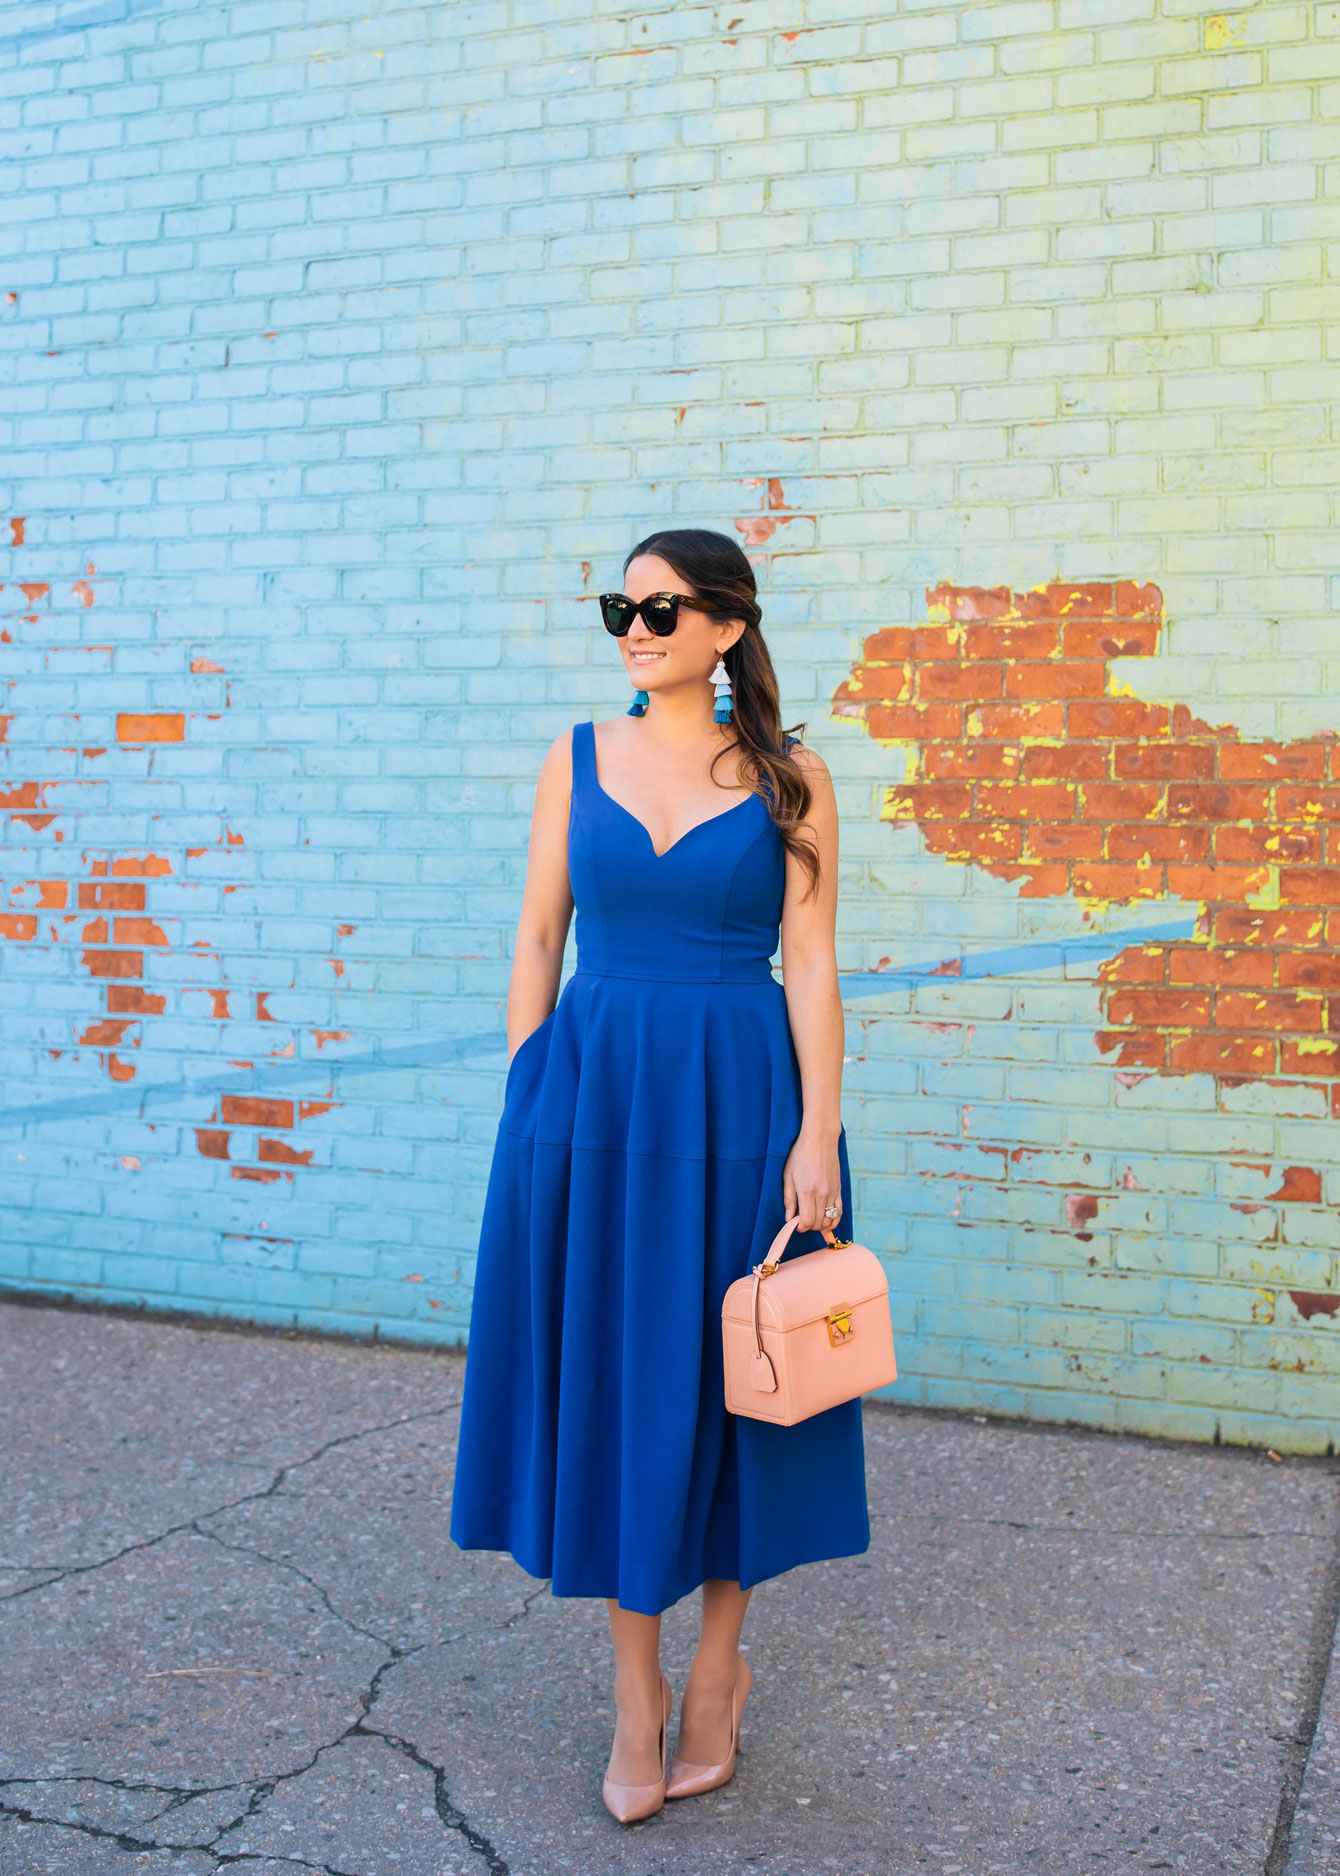 Cobalt Blue Fit and Flare Midi Dress at a Colorful DUMBO Mural